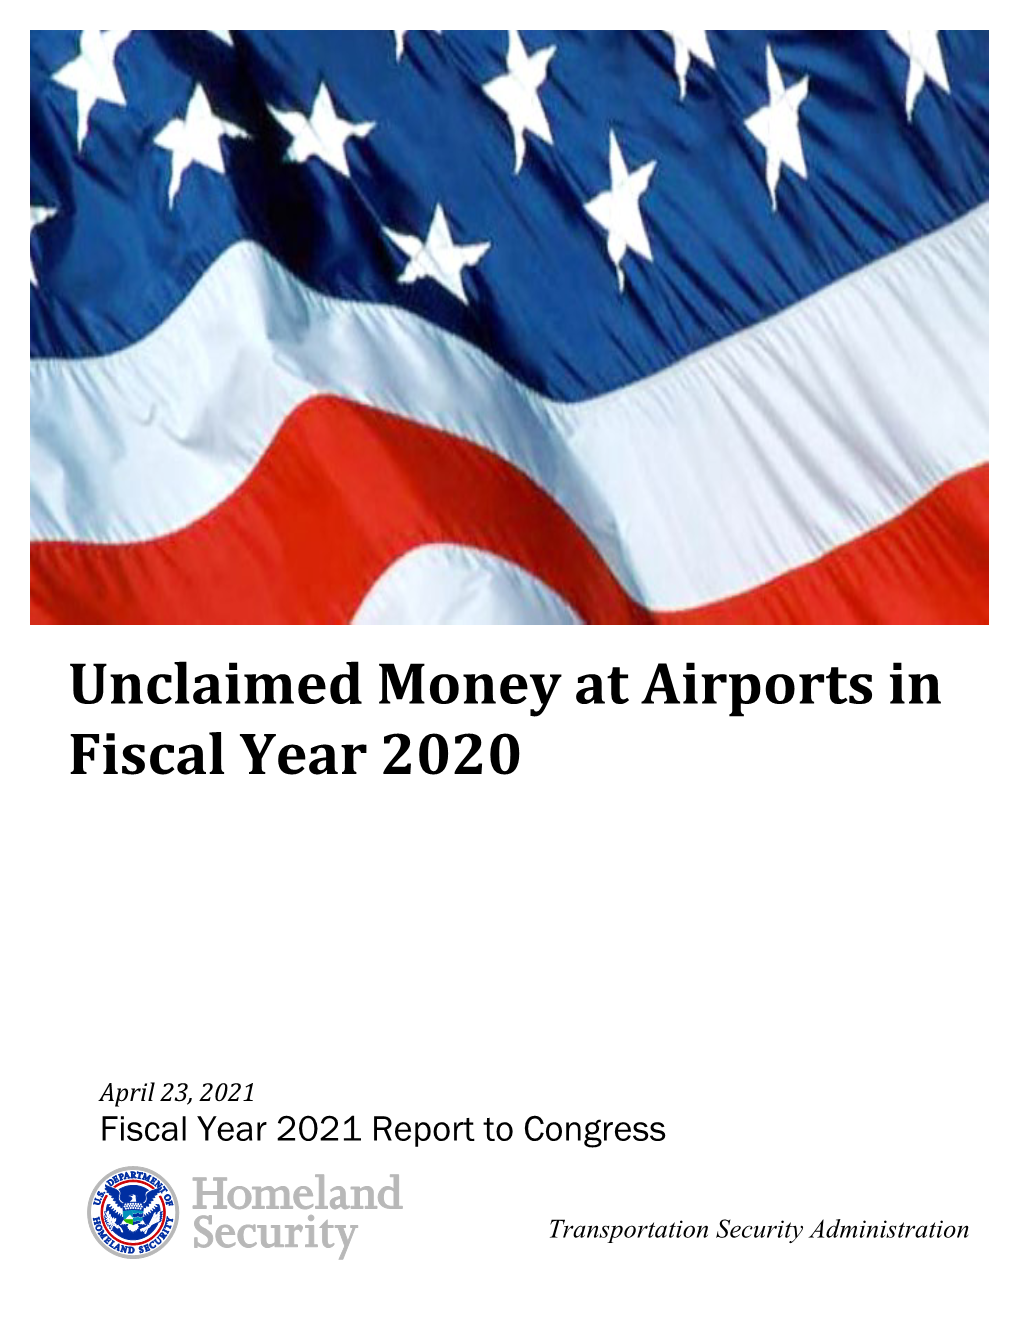 Unclaimed Money at Airports in Fiscal Year 2020